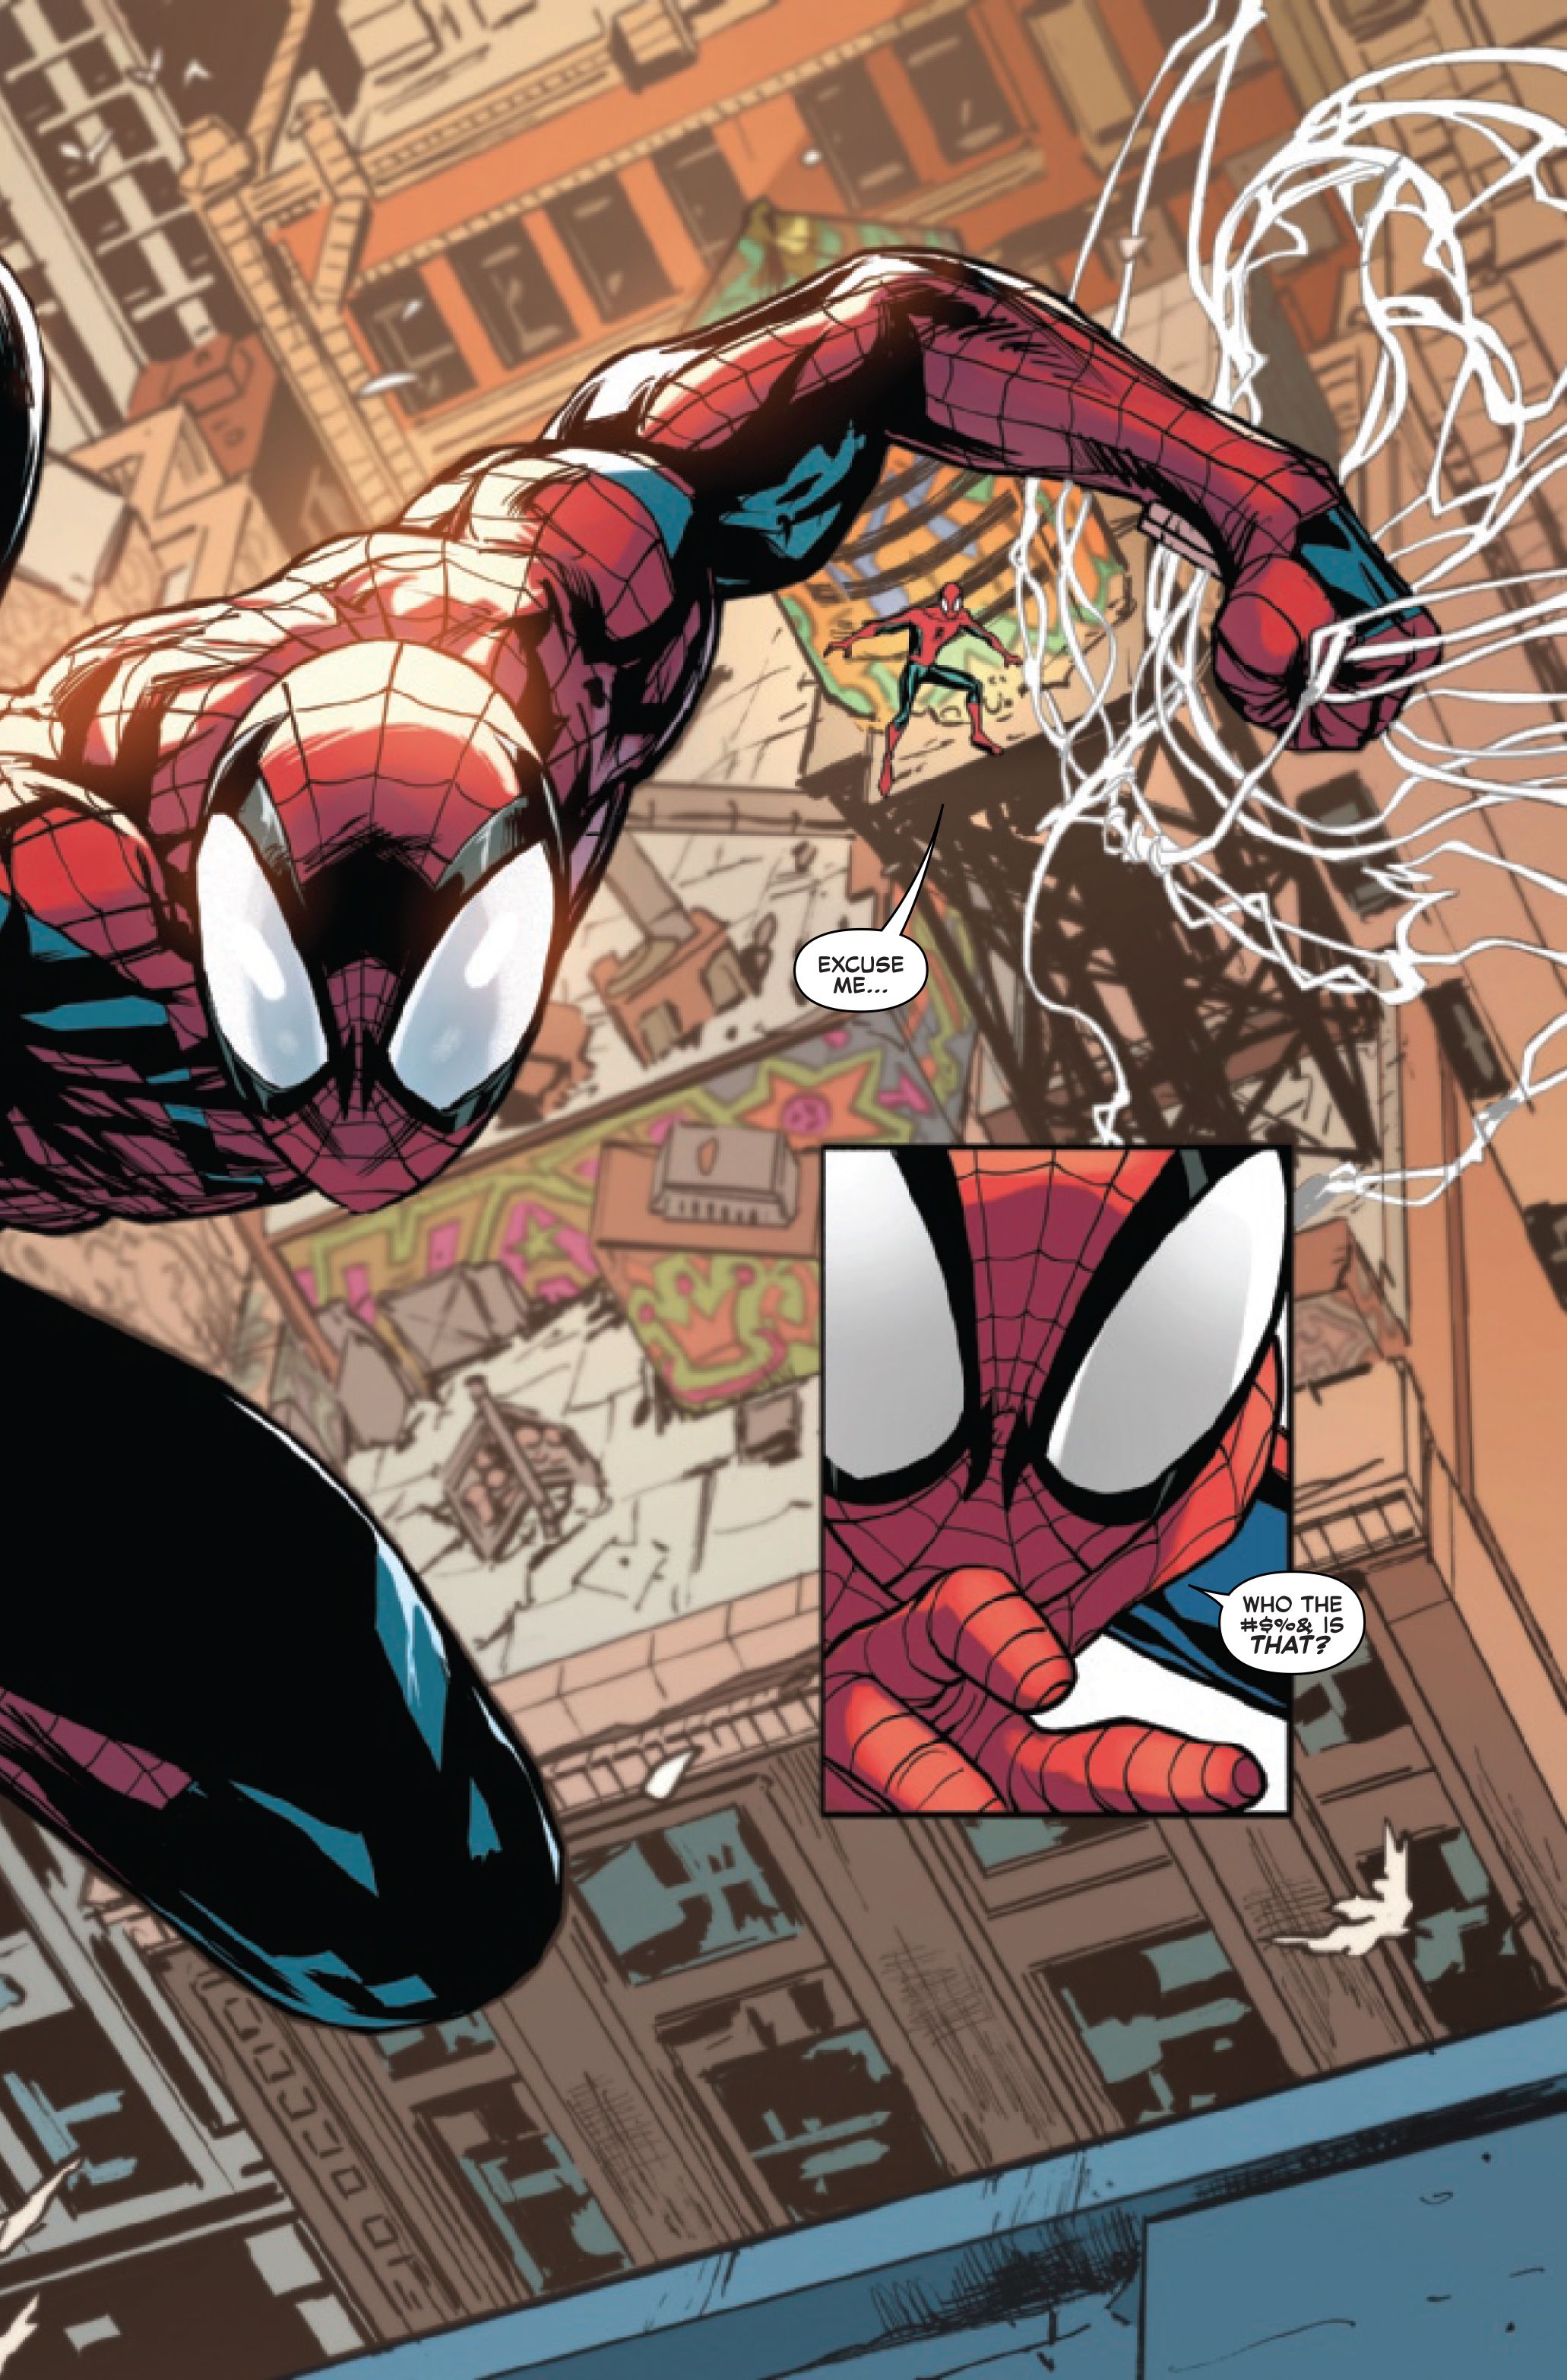 Amazing Spider-Man #75 page 6 by Zeb Wells and Patrick Gleason.